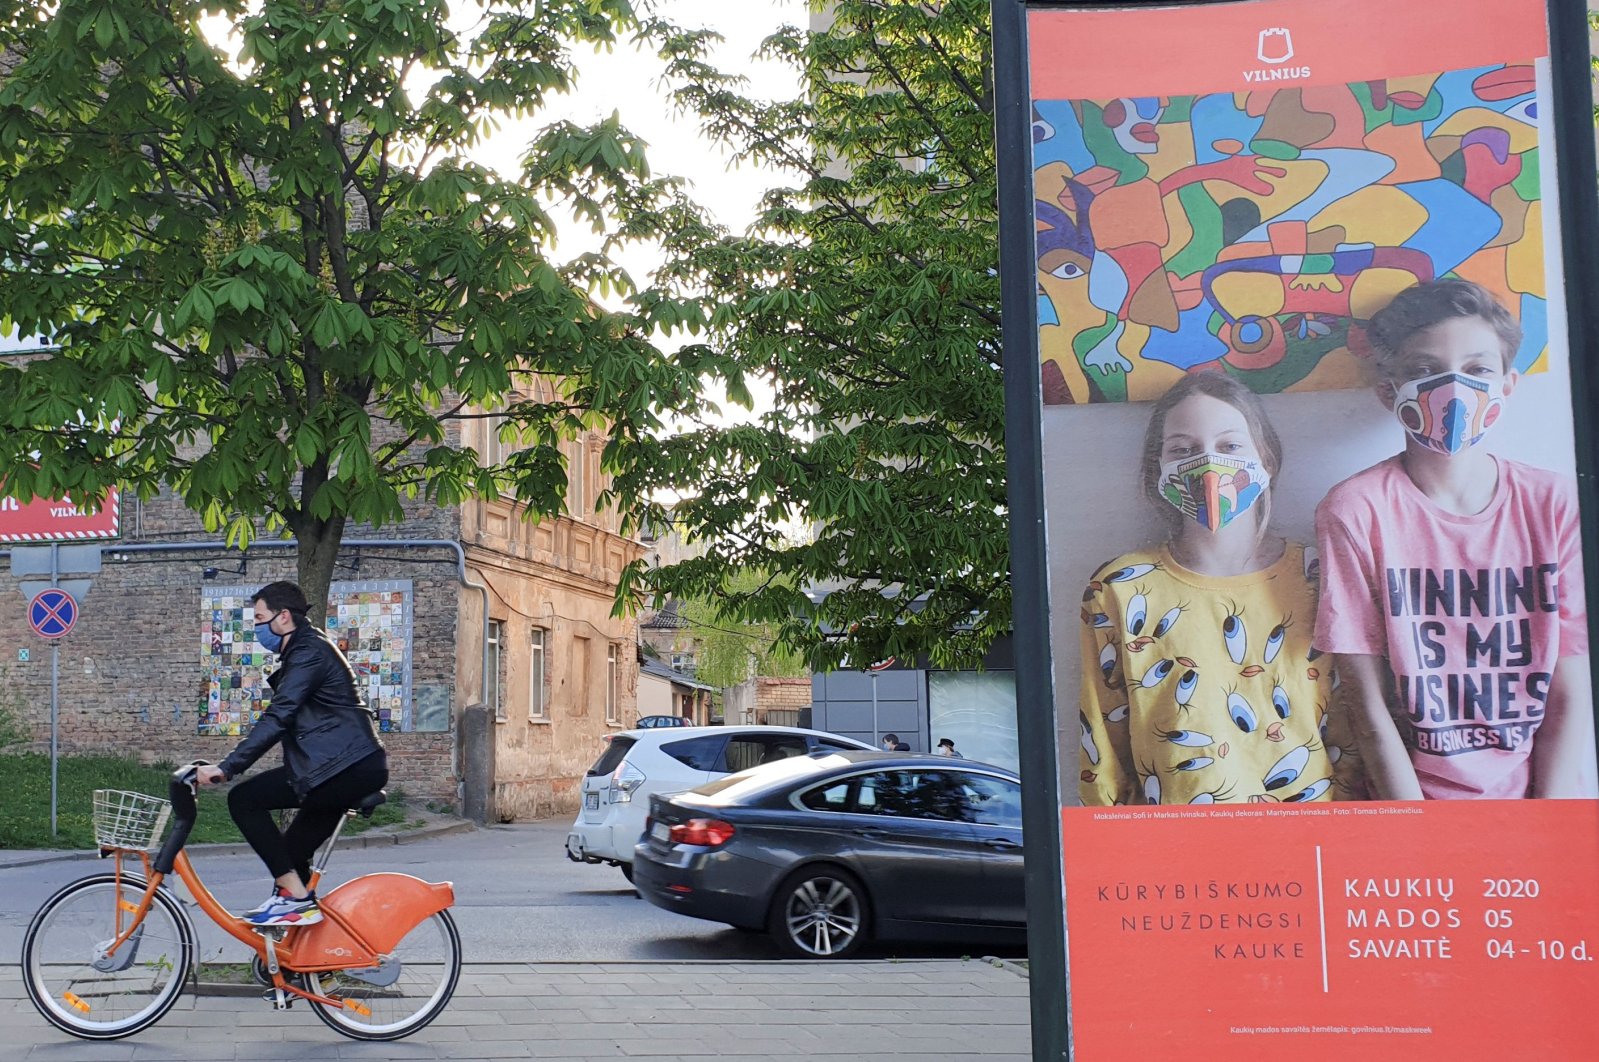 A bicyclist rides next to a billboard for "Mask Fashion Week" during the coronavirus outbreak in Vilnius, Lithuania, May 5, 2020. (Reuters Photo)